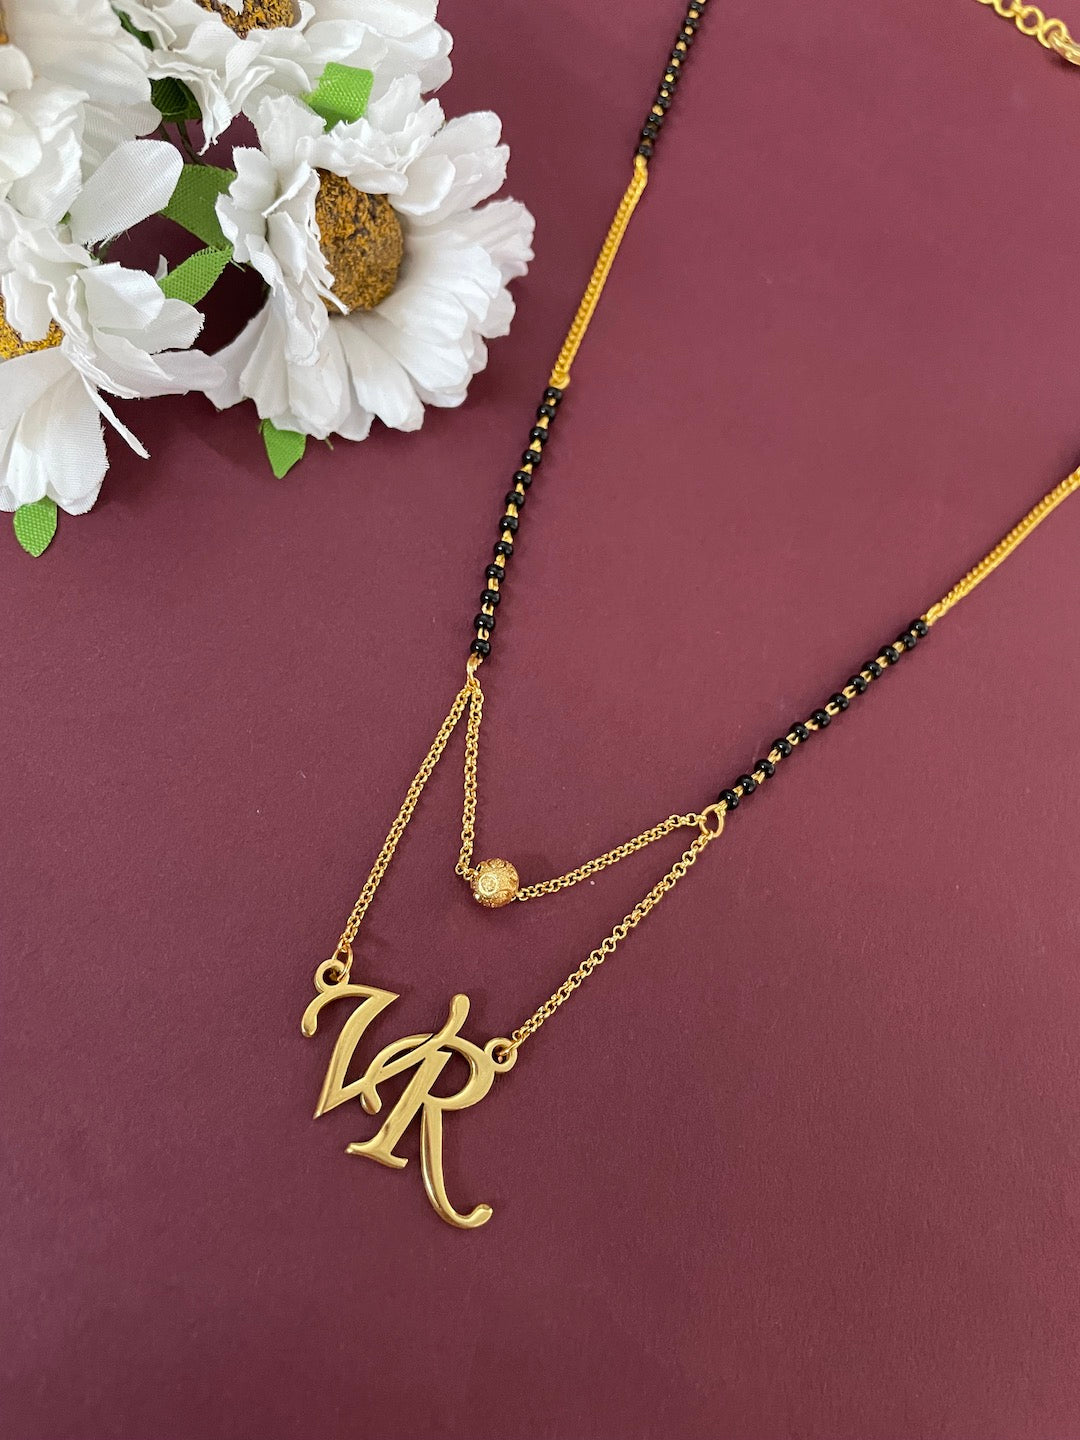 Custom Initial Pendant Name Mangalsutra Necklace (20 Inches)